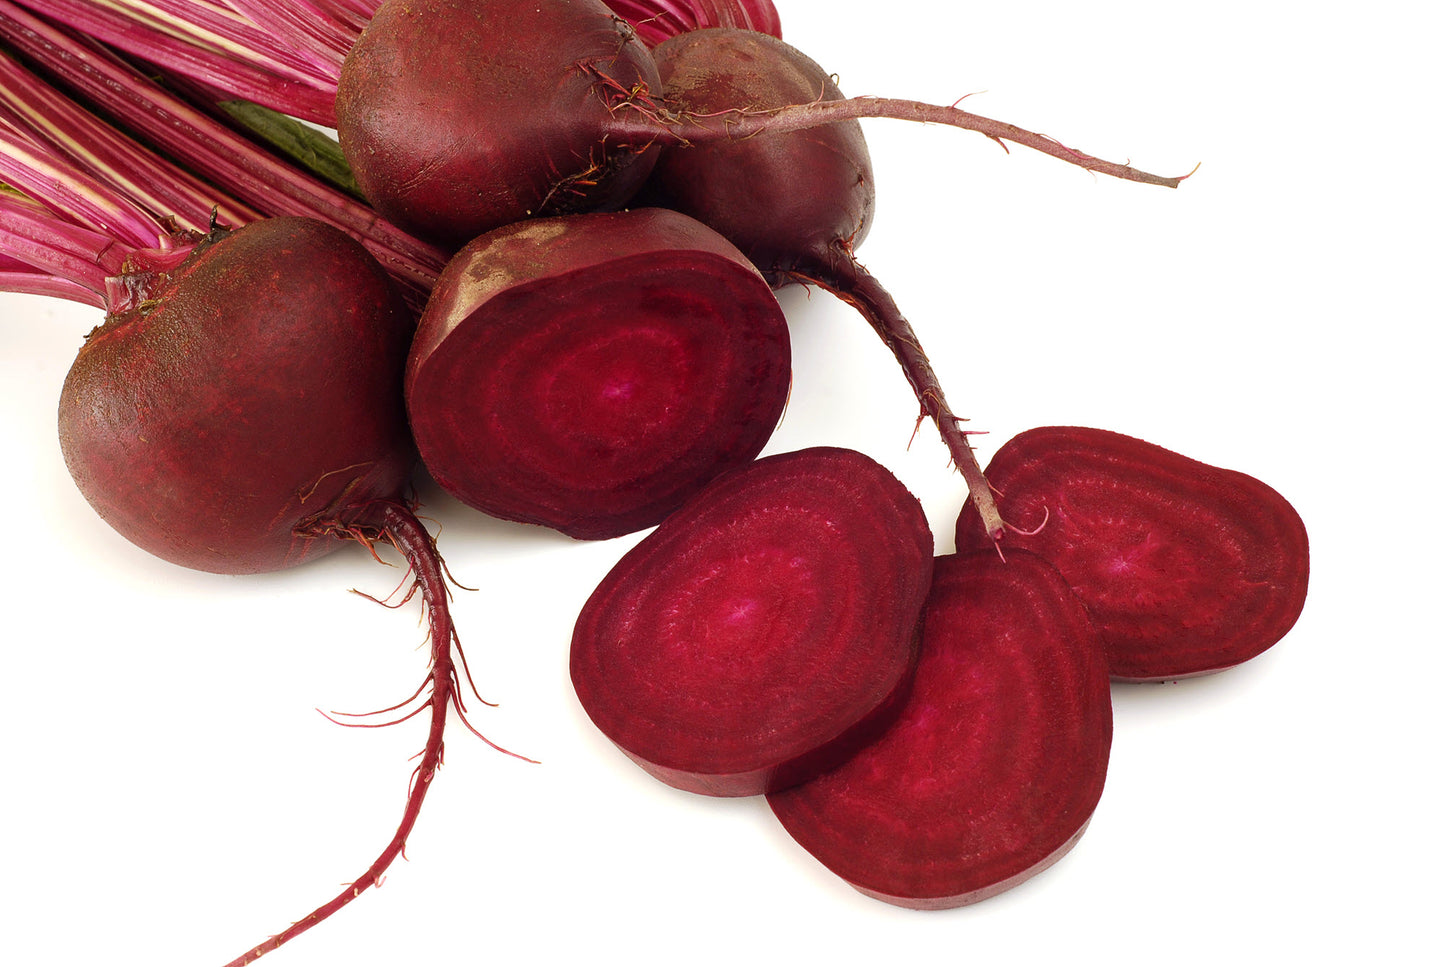 On display are 4 beets, of the variety Detroit Dark Red, laying on a white surface, surrounded with a white background. One beet is partially in front of the other 3 beets. The beet in front is cut in half, displaying the red juiciness of the beet flesh, with 3 slices laying in front. The 3 beet in the back are intact, with the stem and leaves also intact.  Prominently displayed for the 3 beets in the back are their long roots.